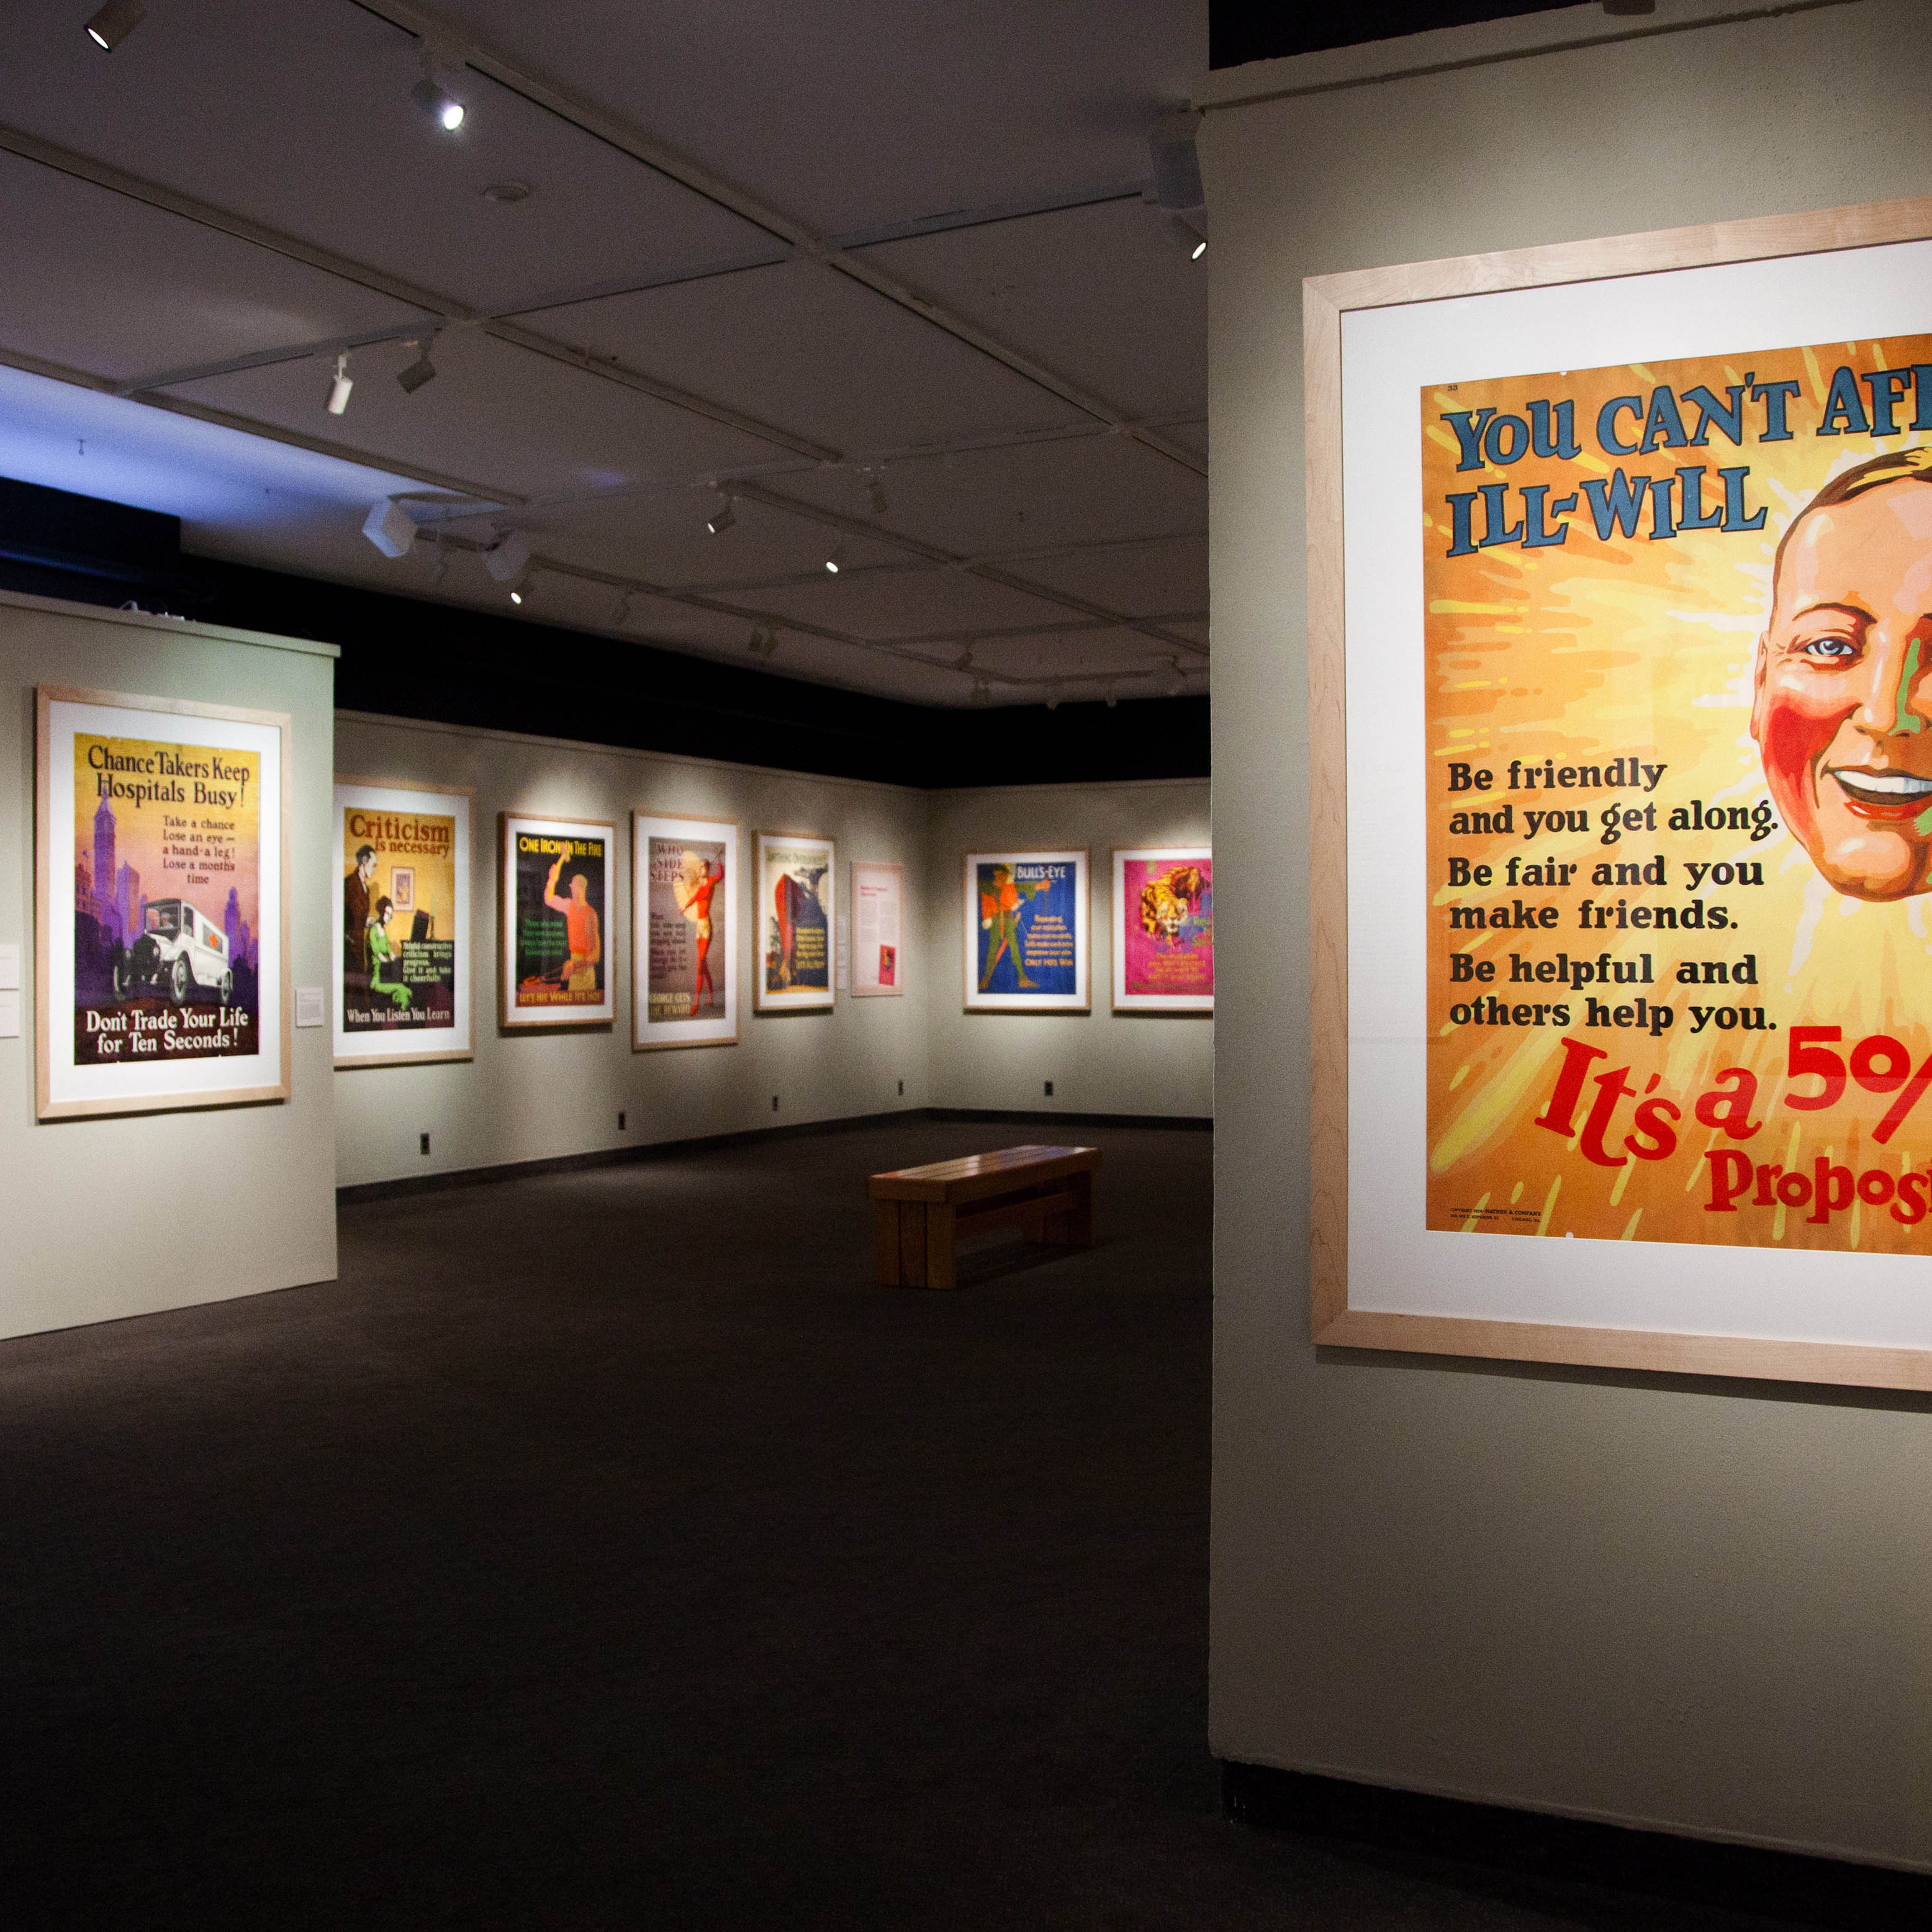 Say it With Snap exhibition adverstising posters on display